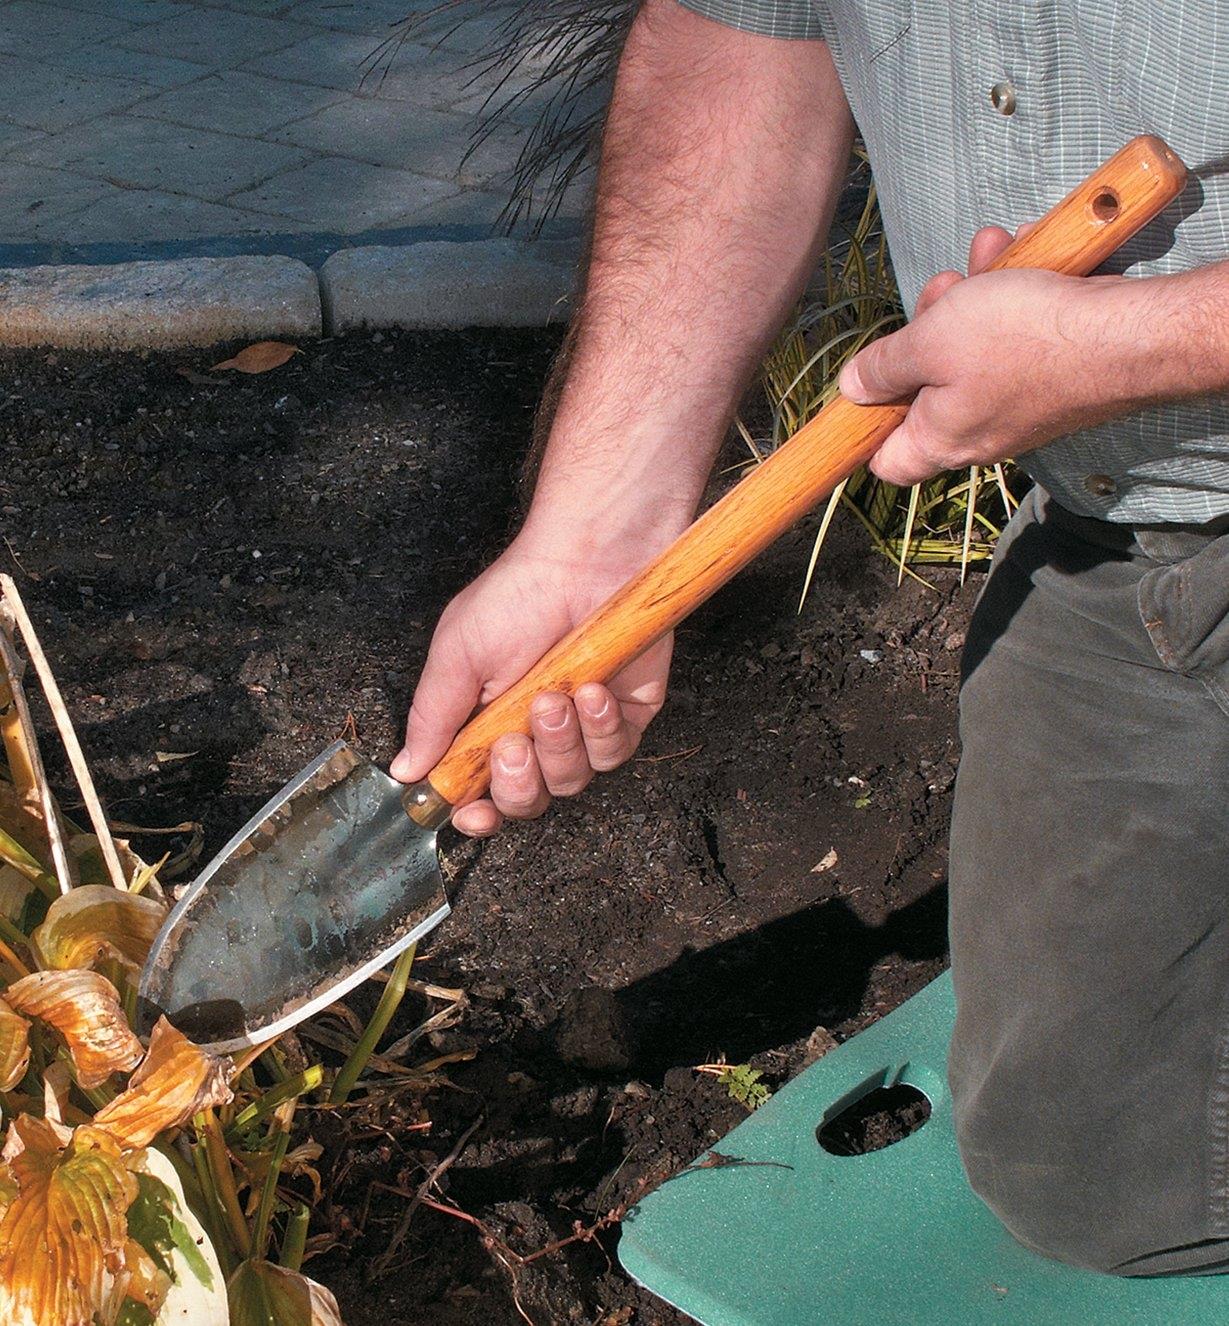 Digging in a garden with a long-handled trowel